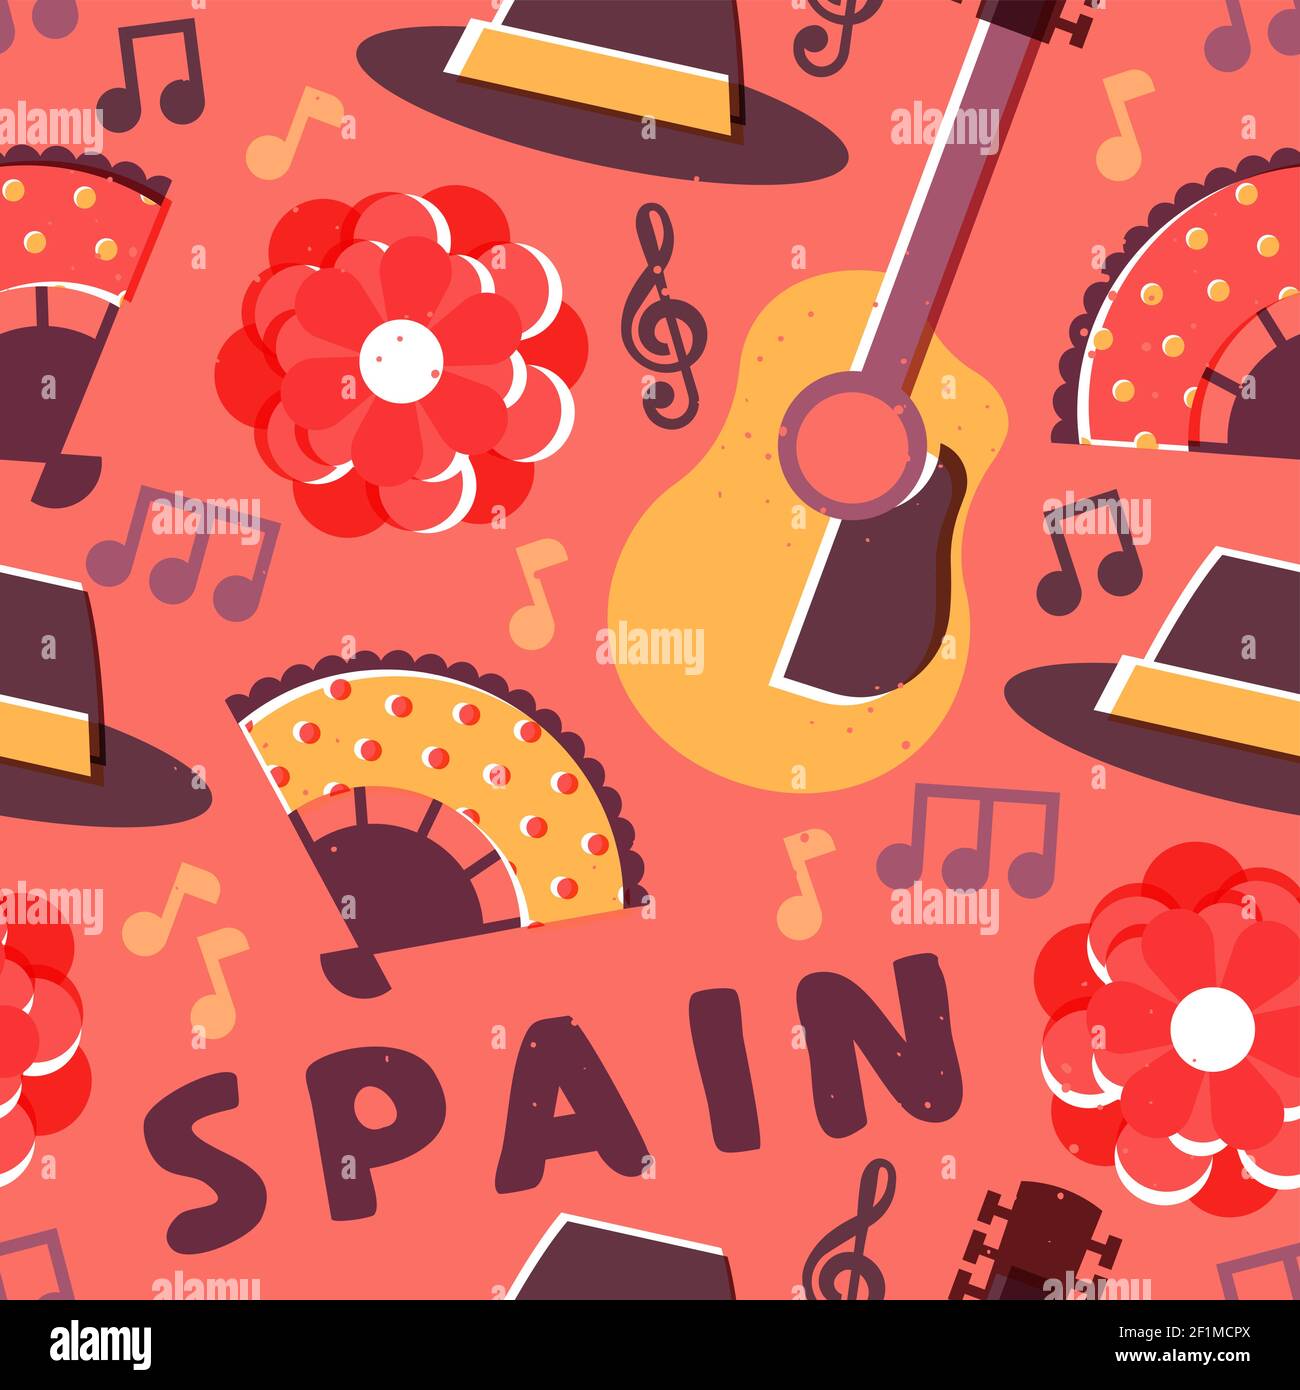 Spanish culture seamless pattern illustration. Spain travel background design with guitar, flamenco music, rose flower, and more. Stock Vector